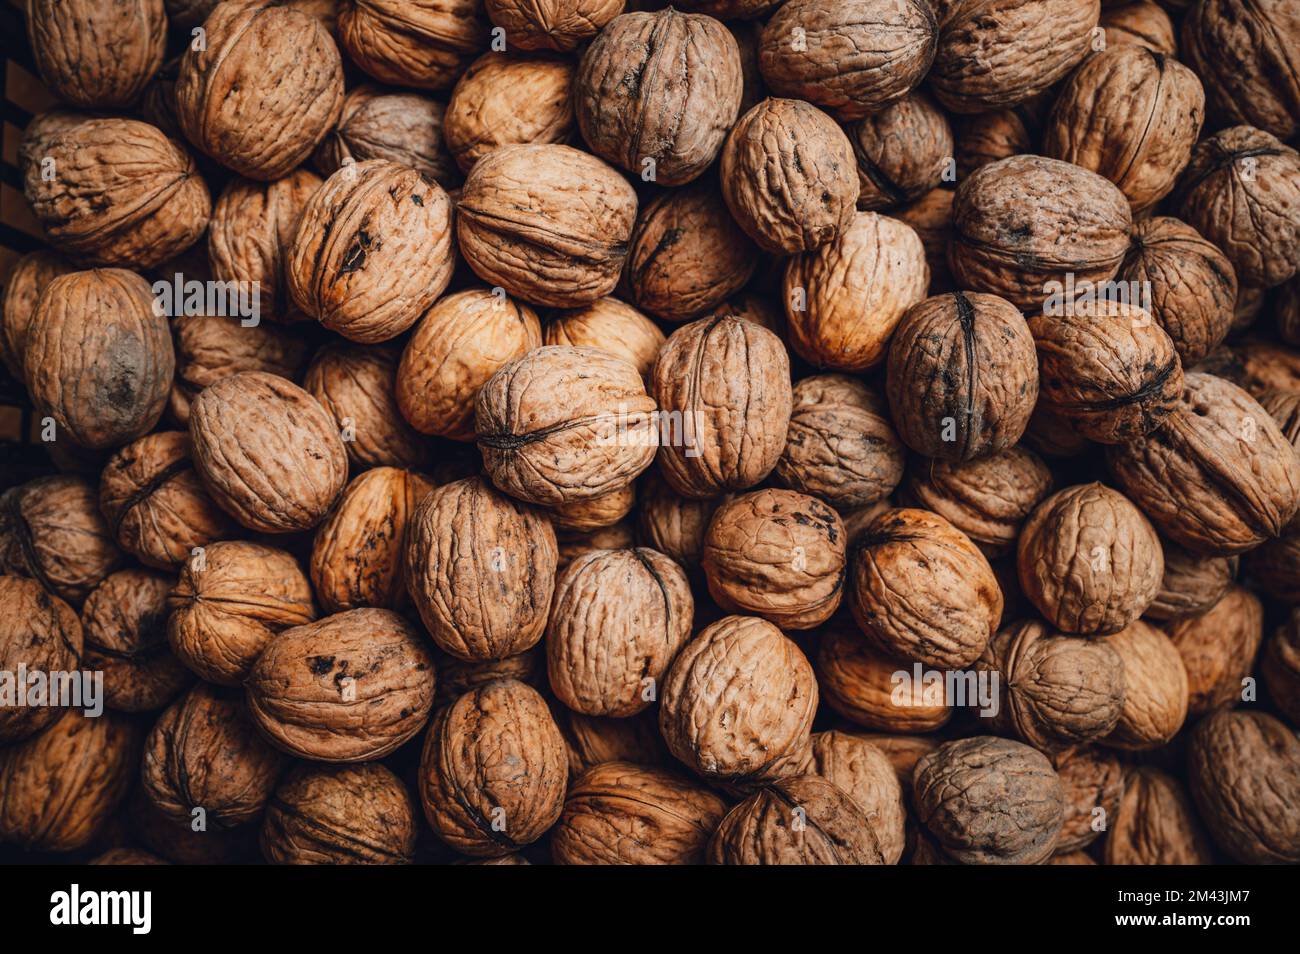 Walnuts, top down view of a large number of nuts. Stock Photo